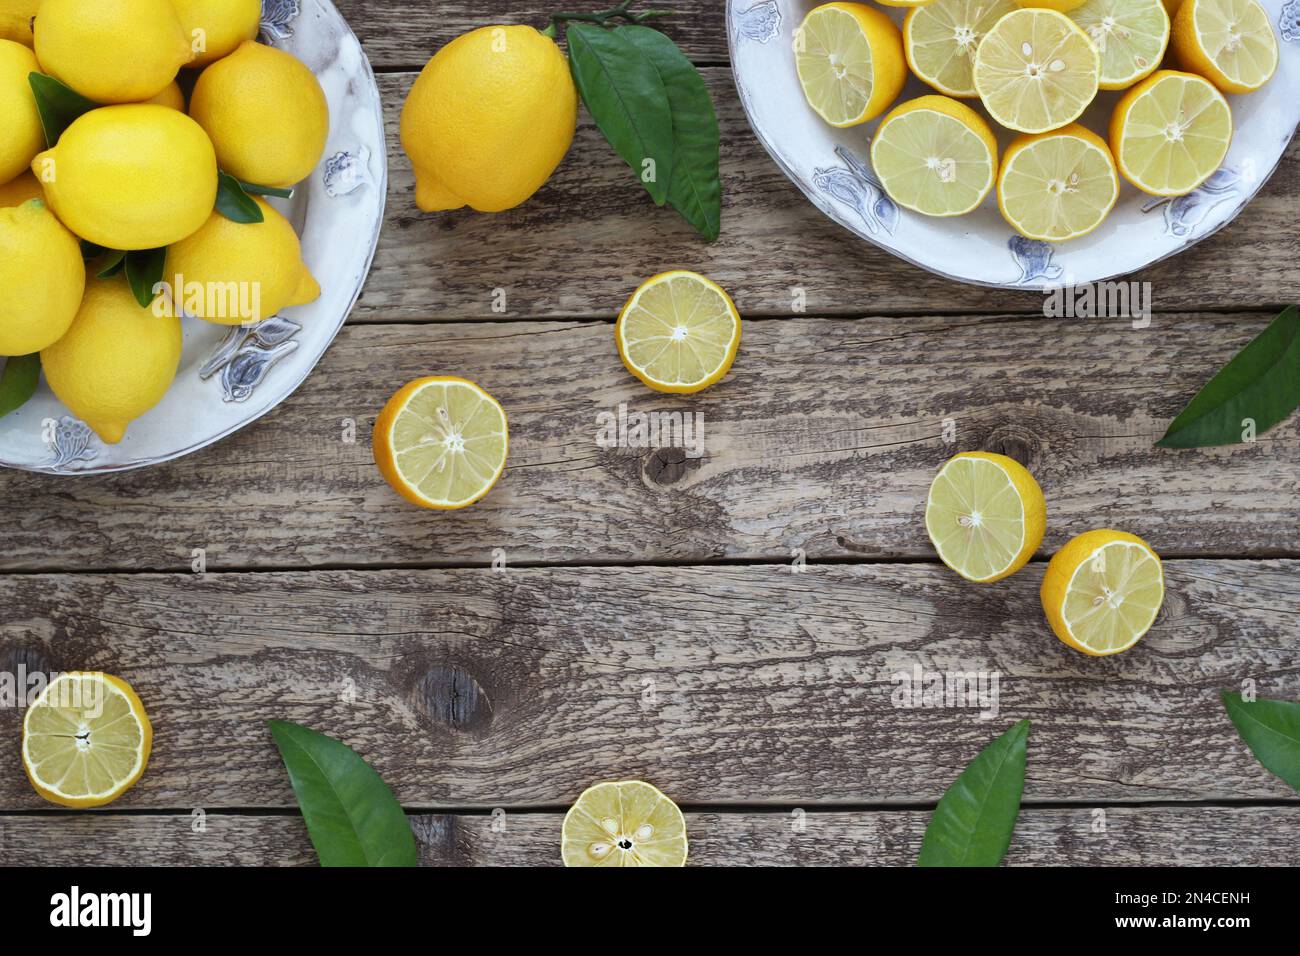 Lemon citrus decorative frame or border on wooden background, arranged whole, halved and sliced lemon fruits on plates with leaves, table top view. Stock Photo